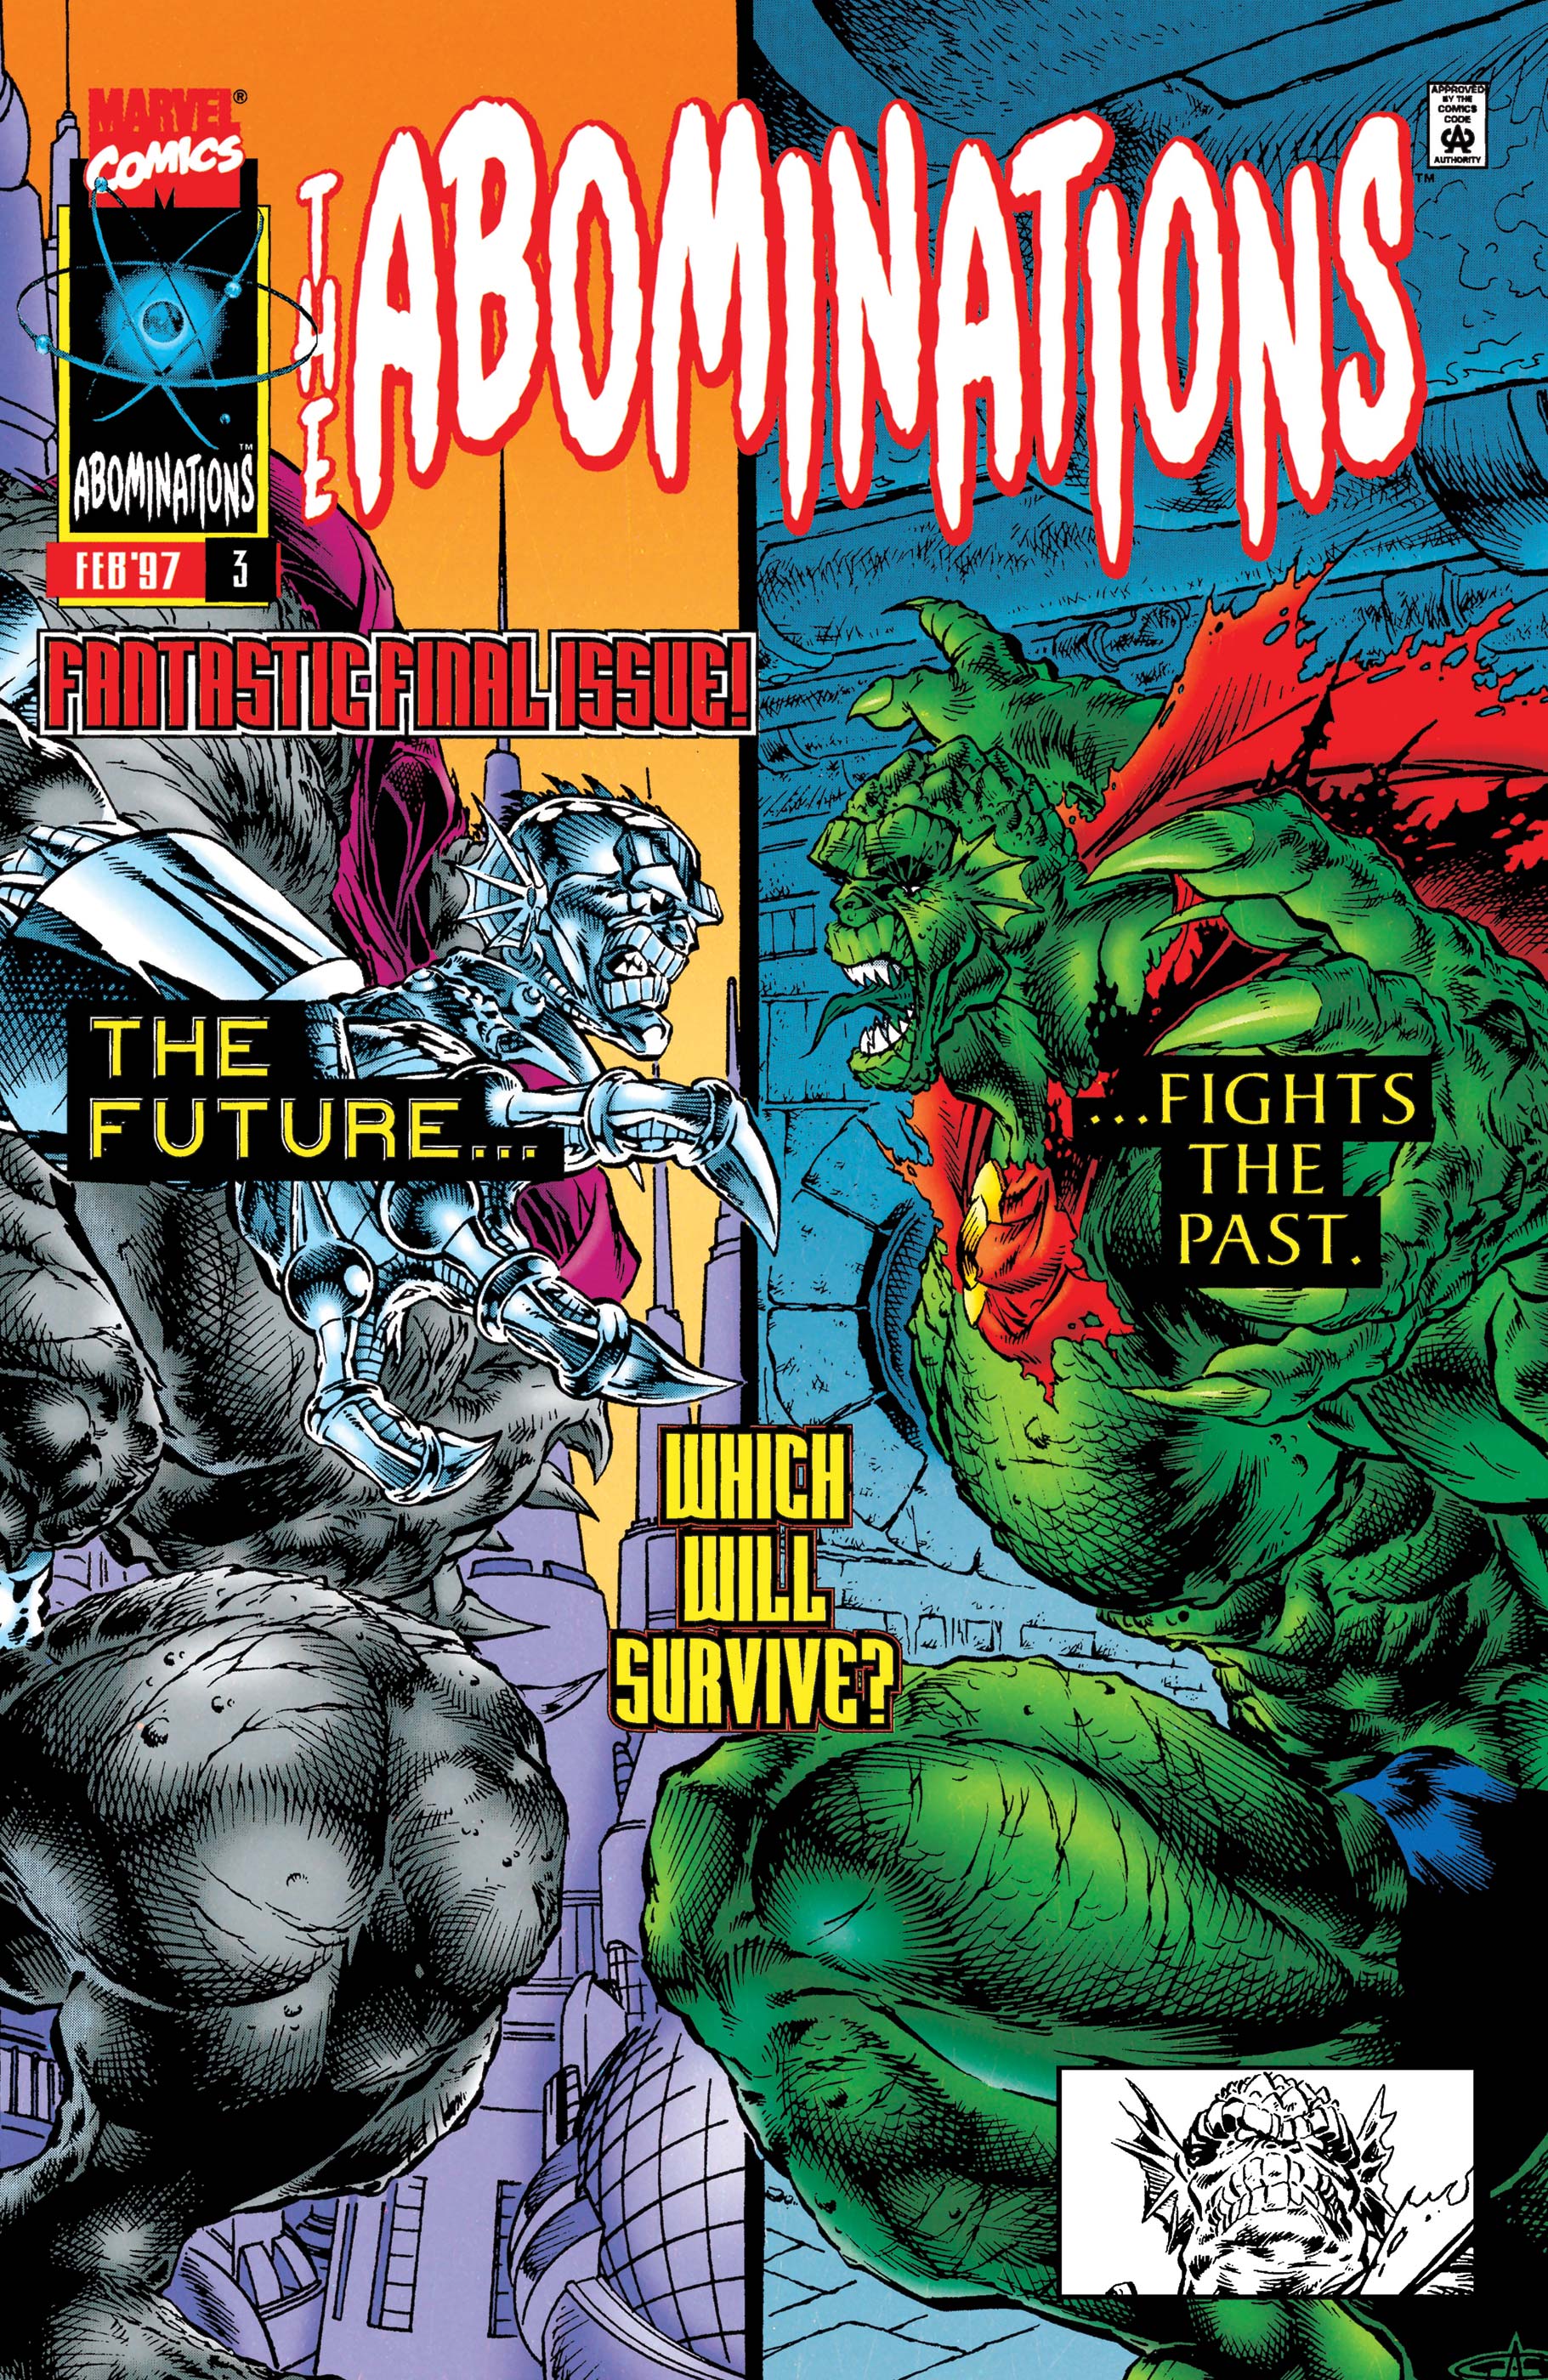 Abominations (1996) #3